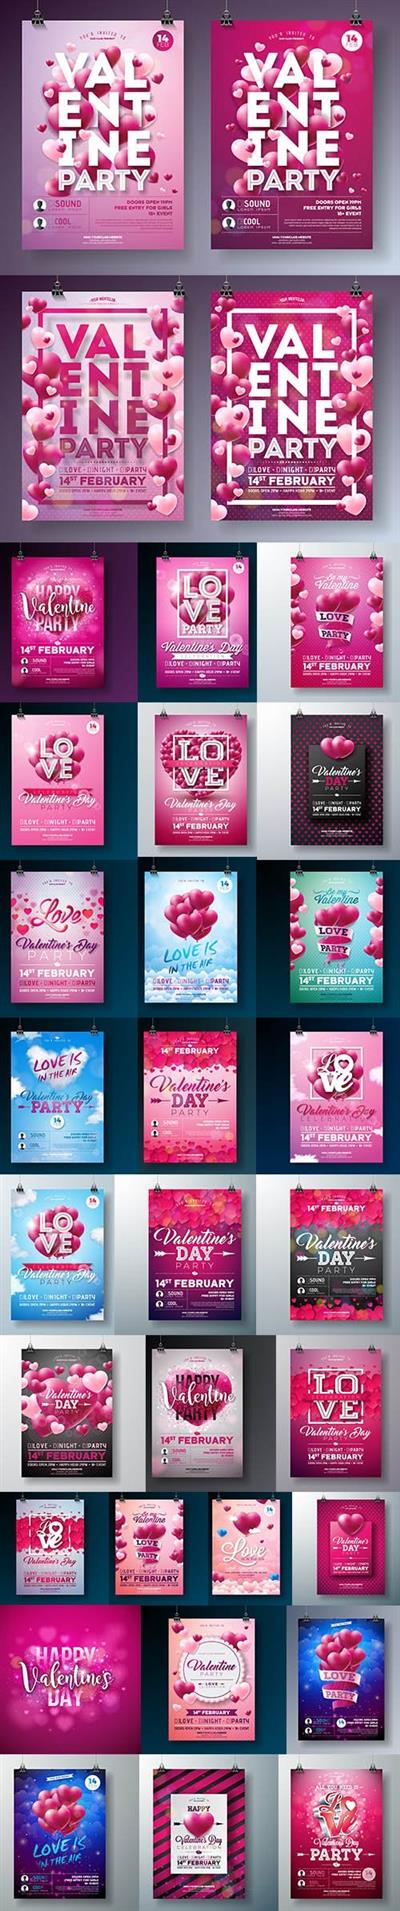 Valentines Day Love Party Flyers Template Pack